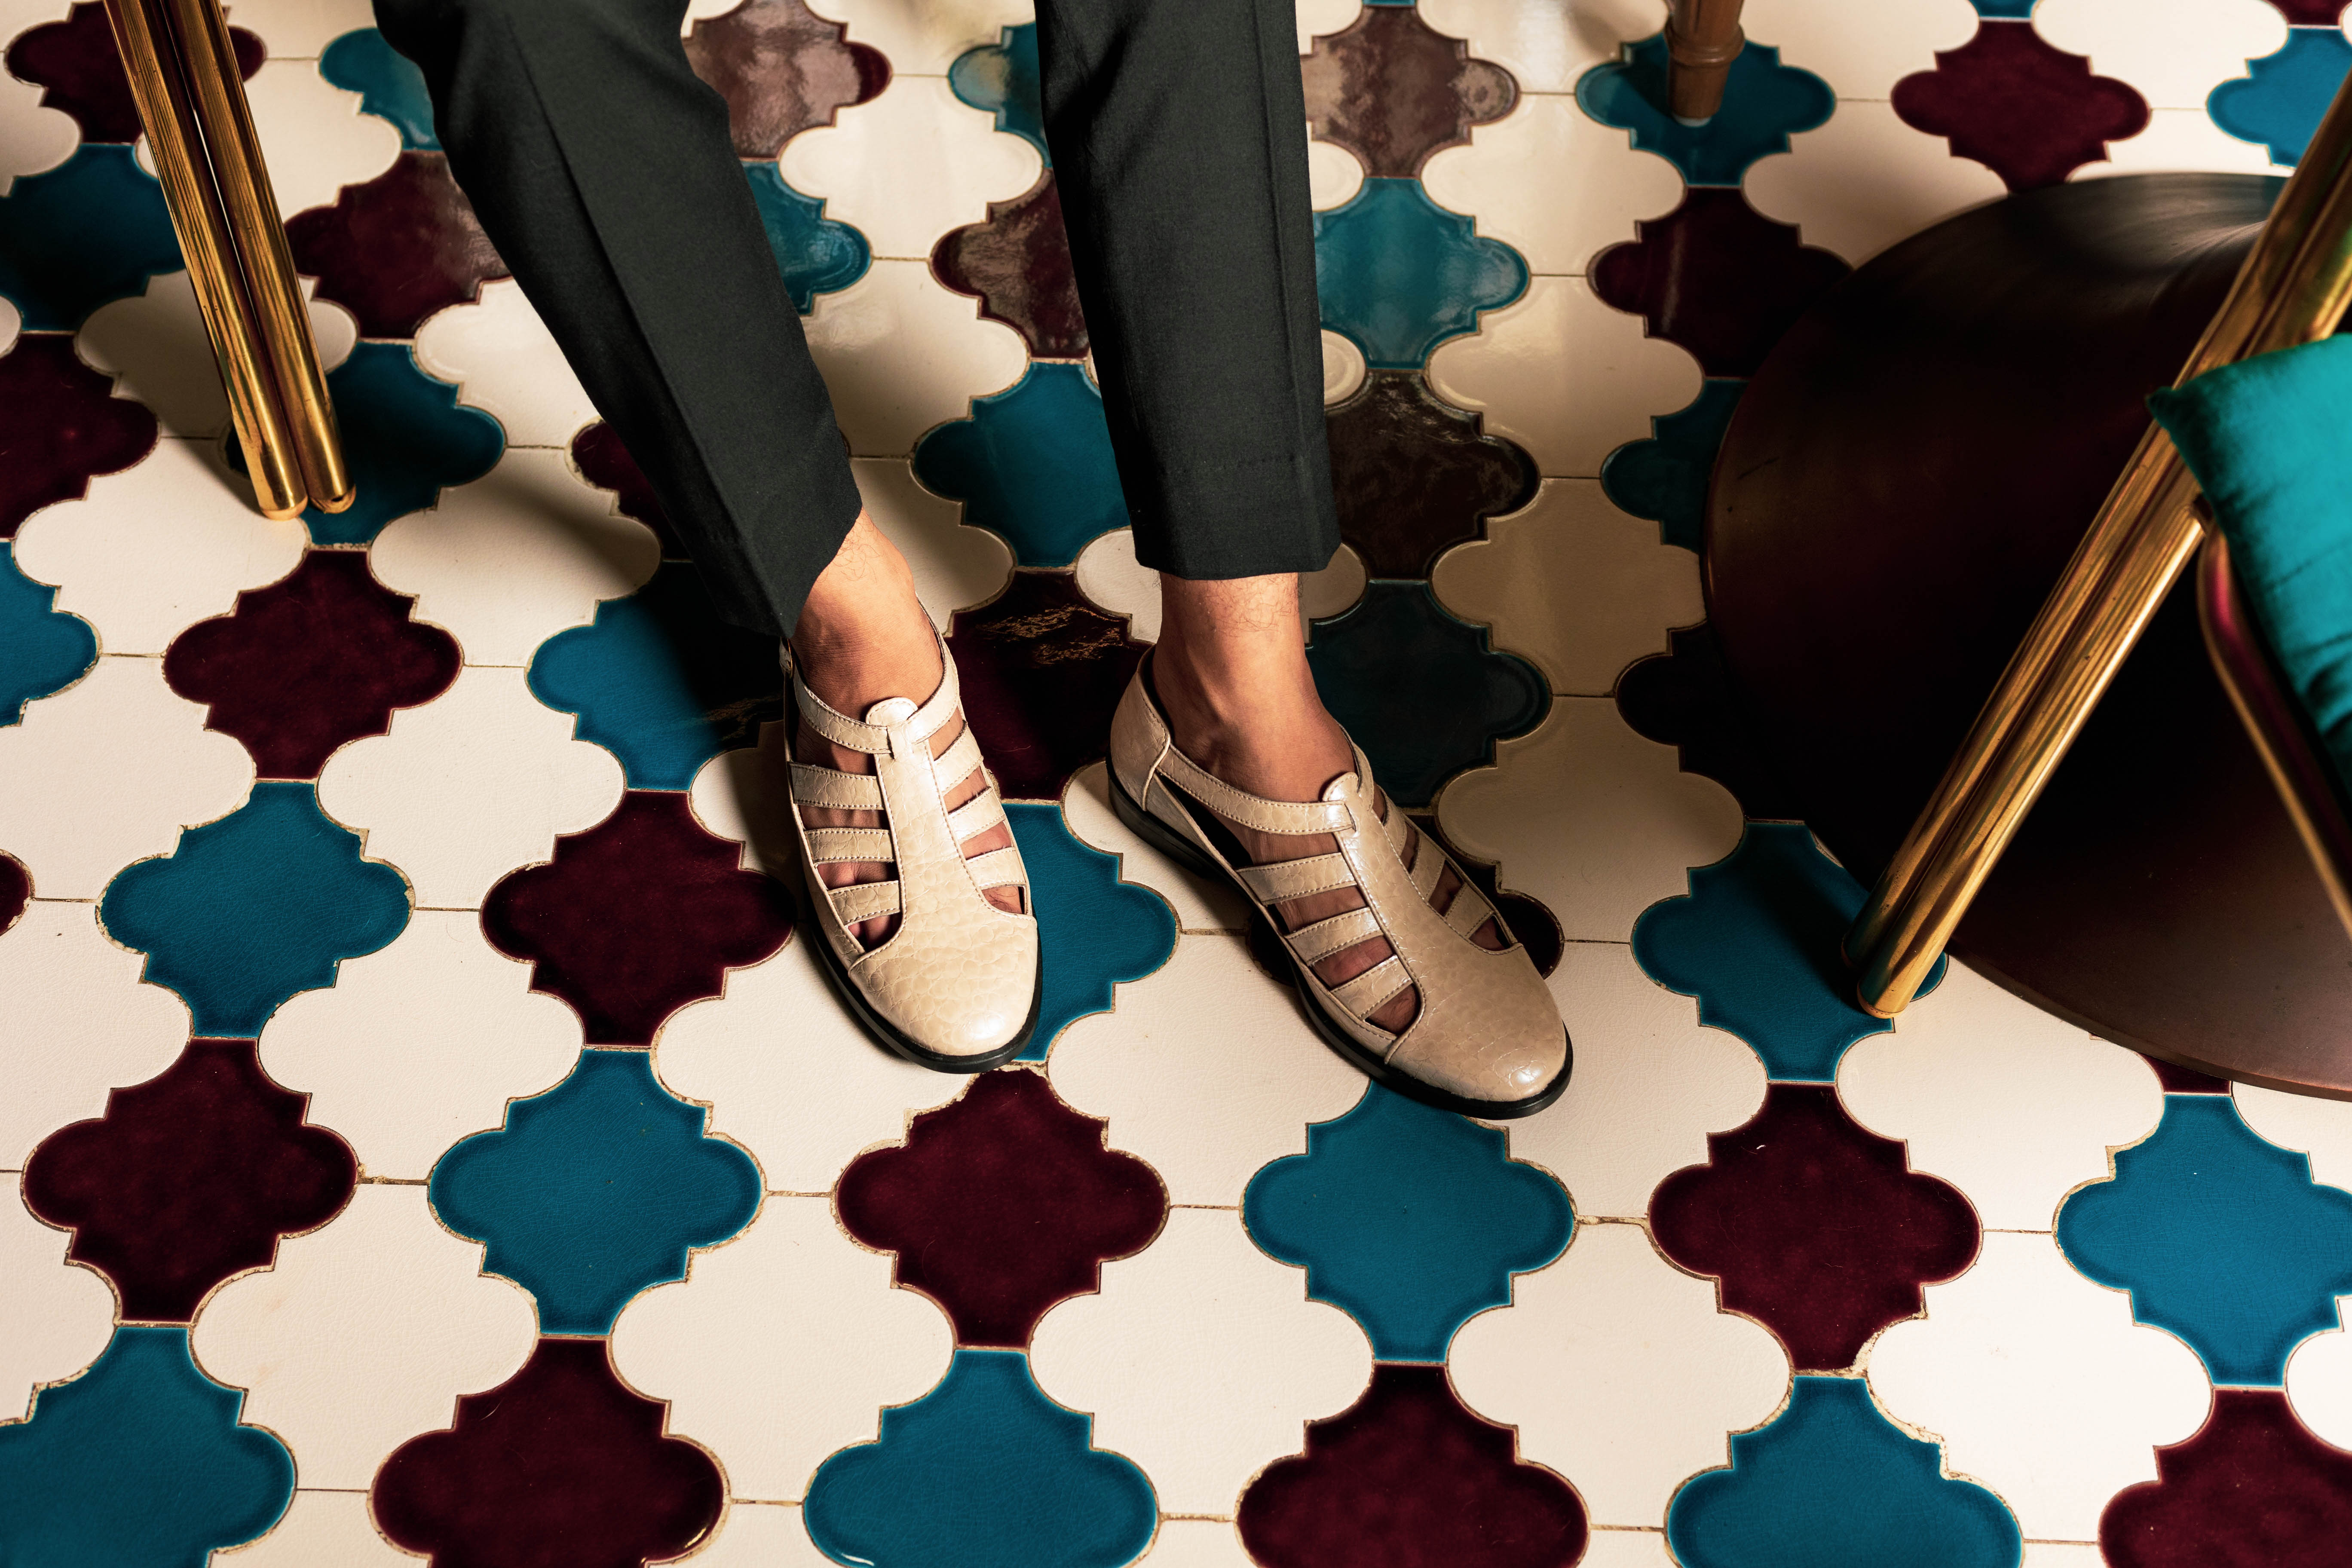 A person's feet on a colorful tiled floor.